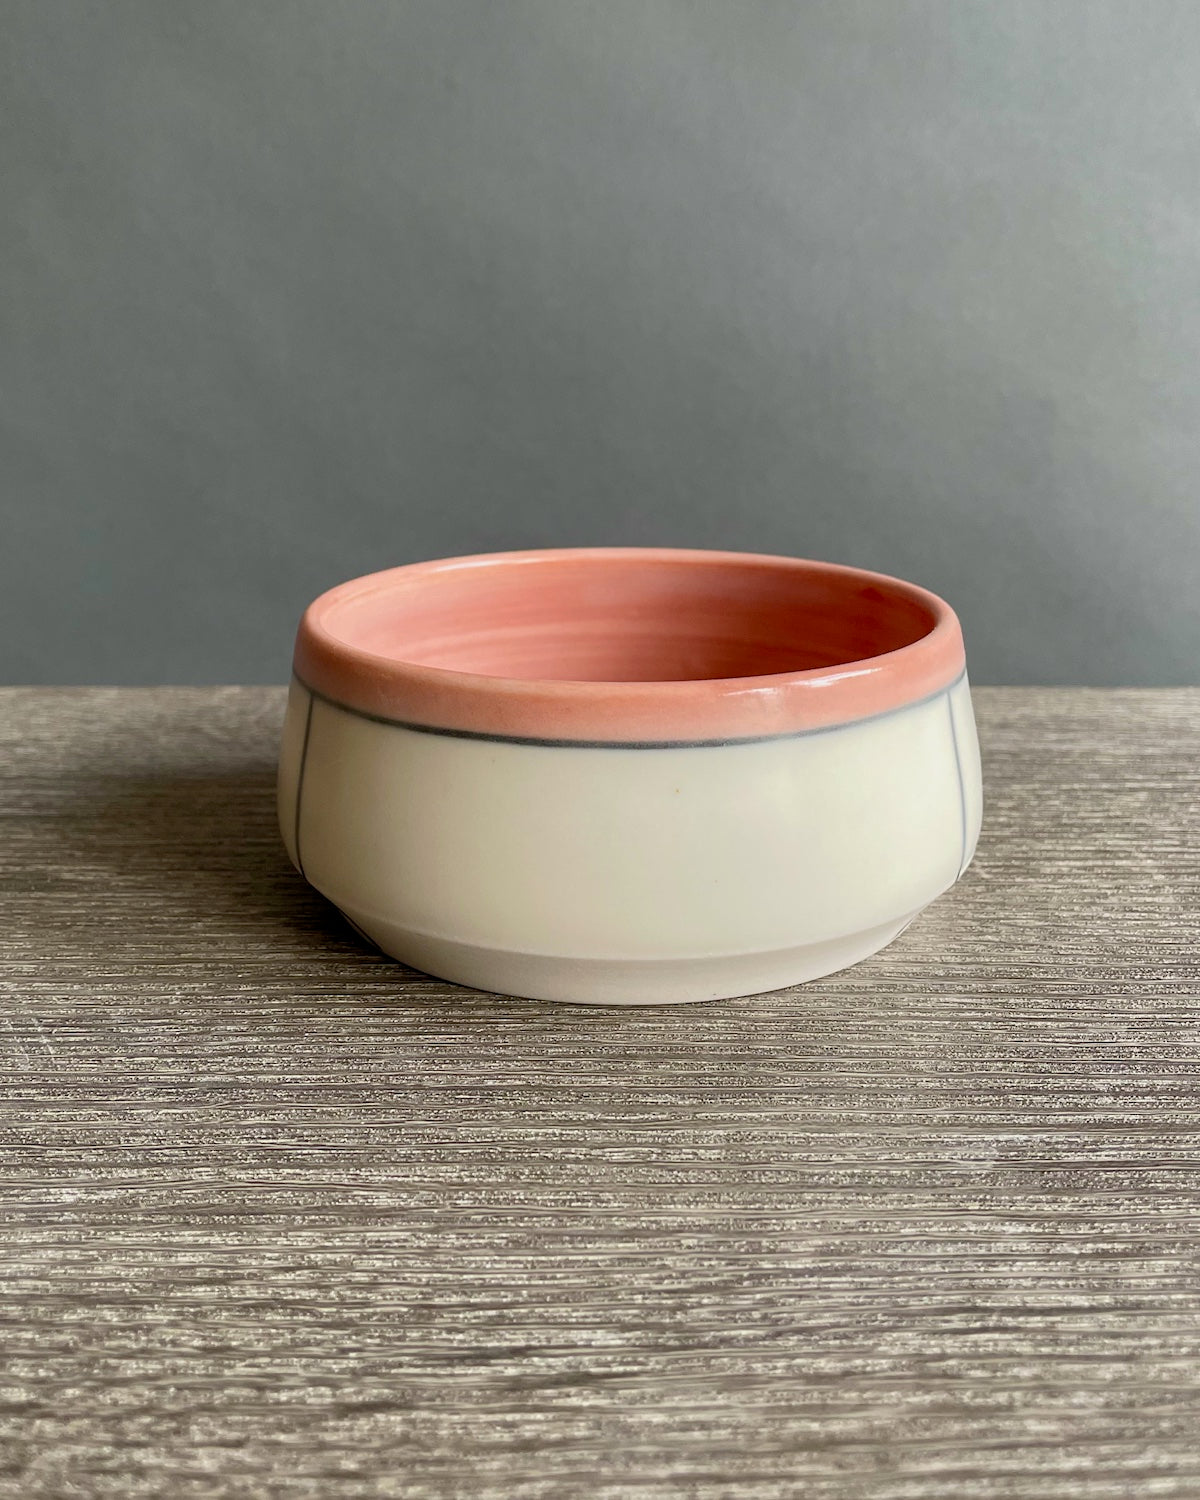 Ring Dish - Line & Color Block